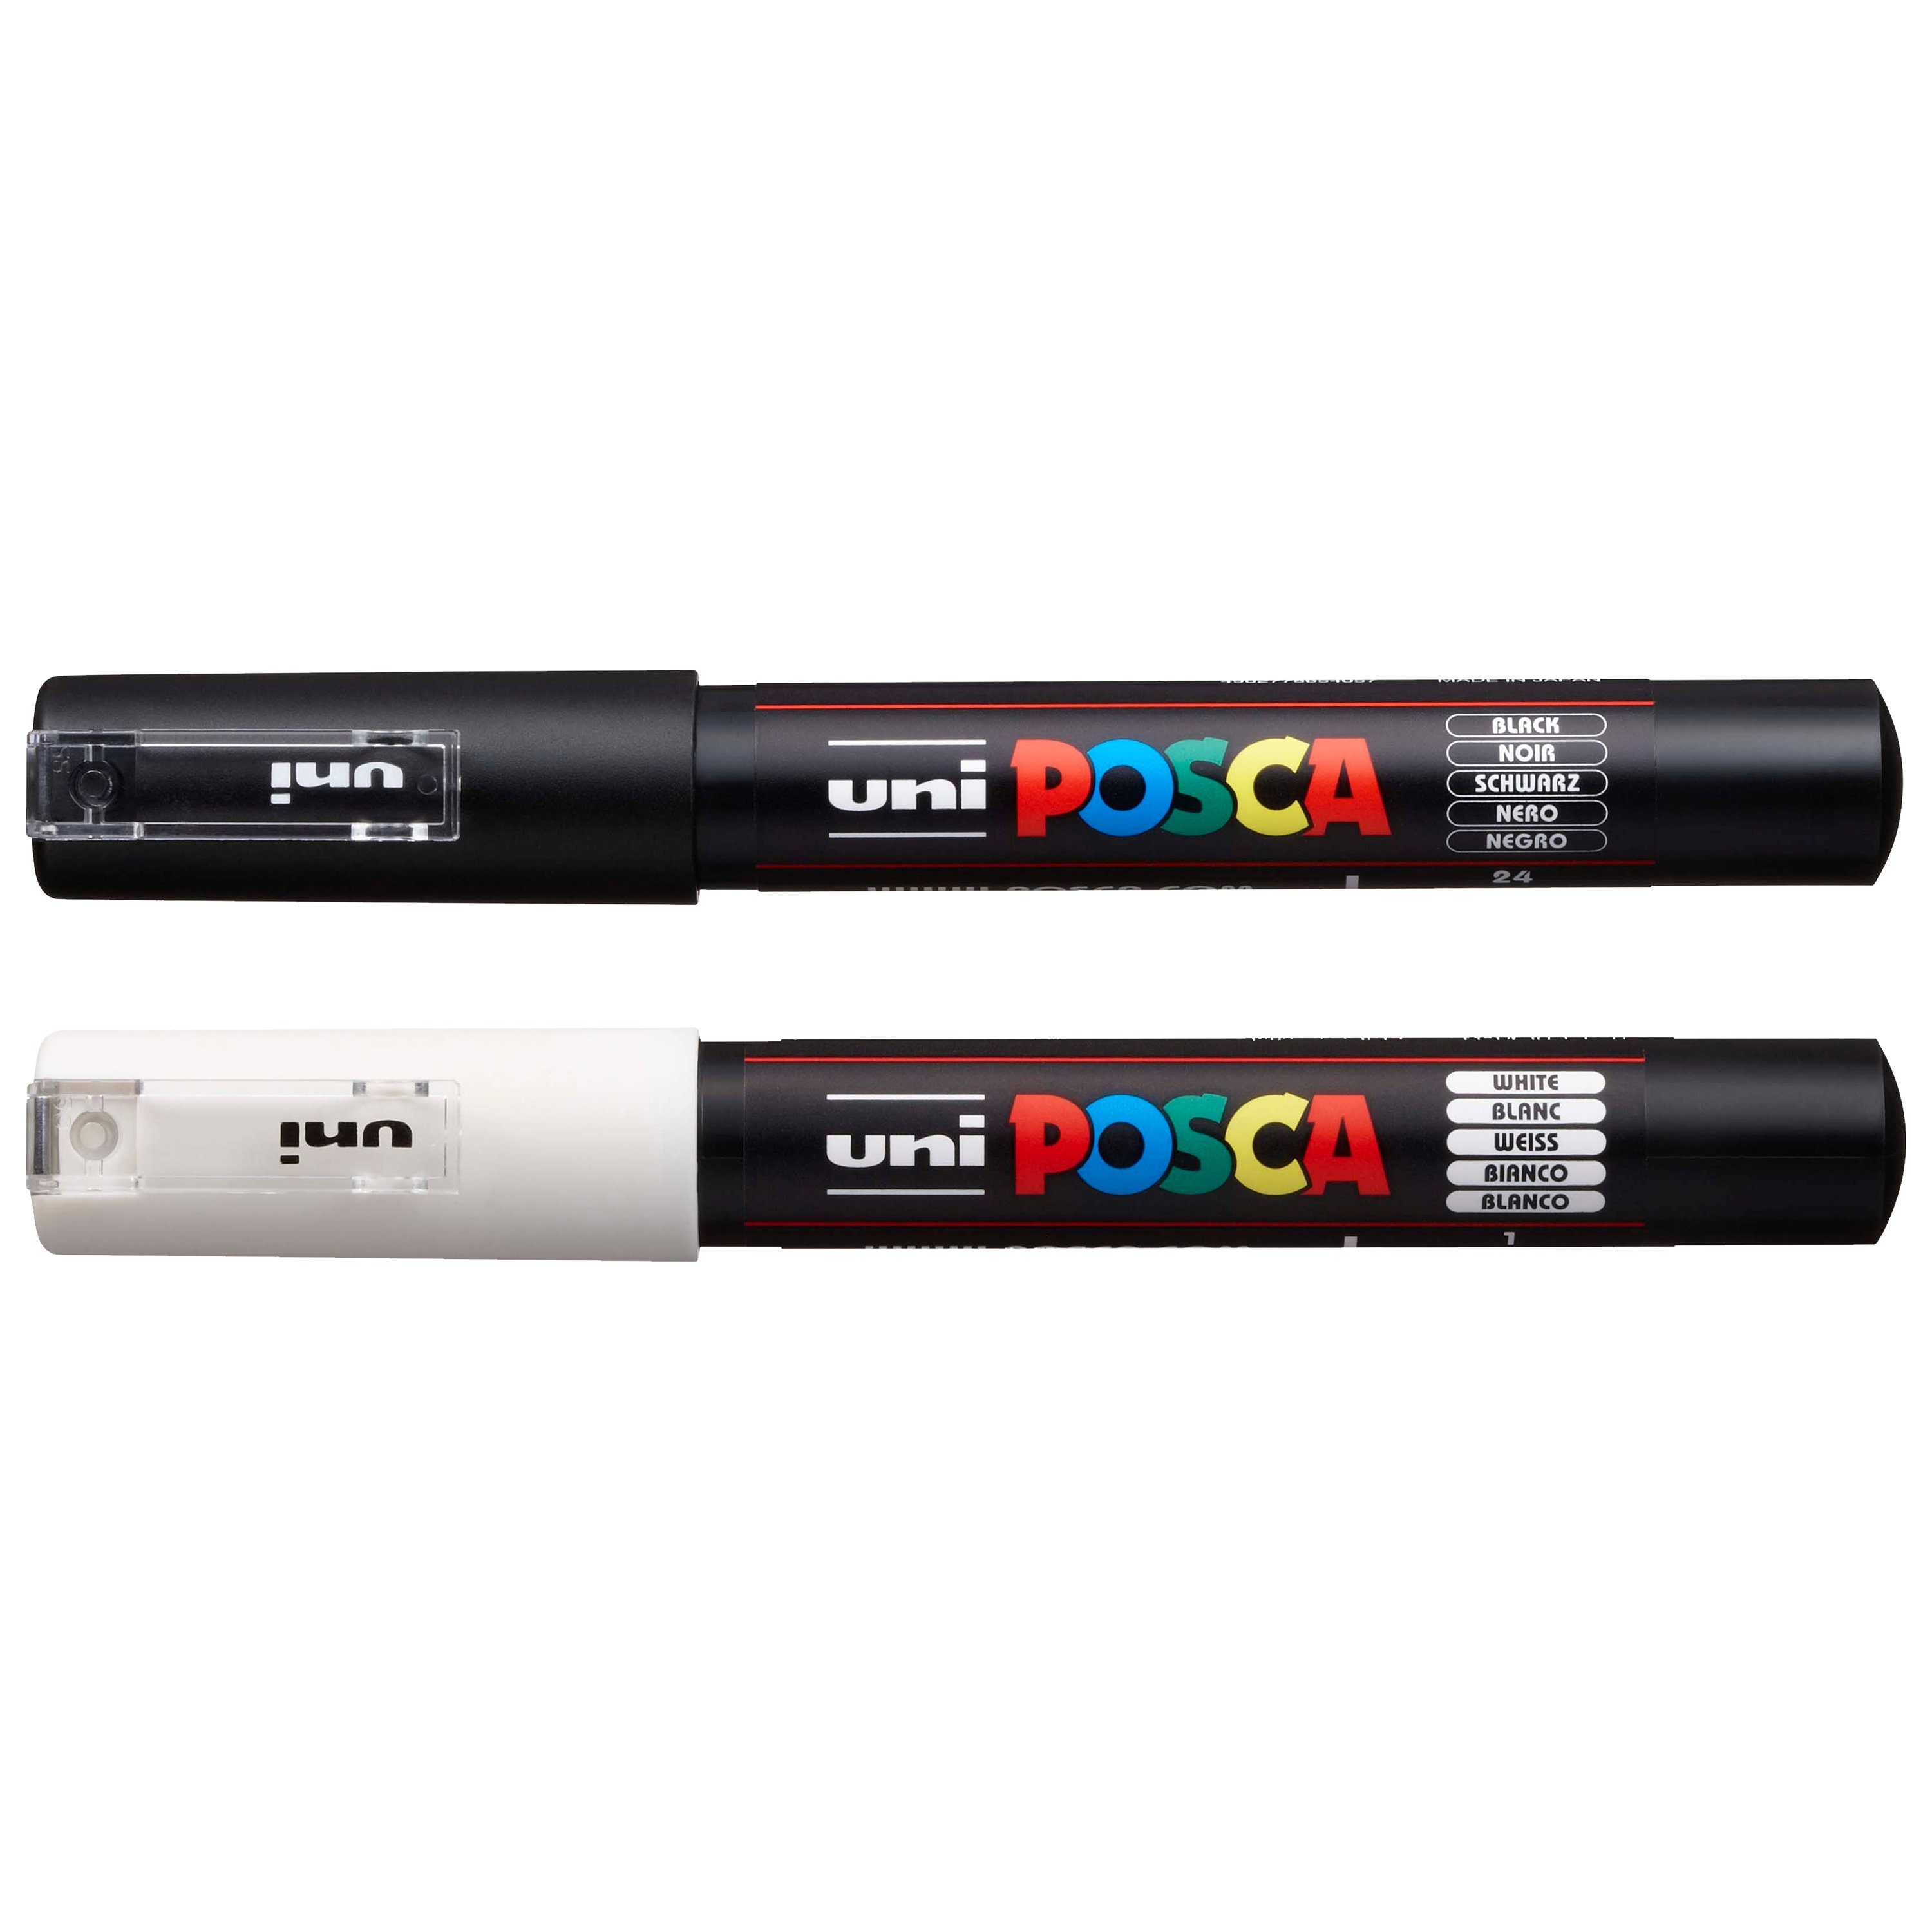 POSCA Extra Fine PC-1M Art Paint Marker Pens Pack of 2 Drawing